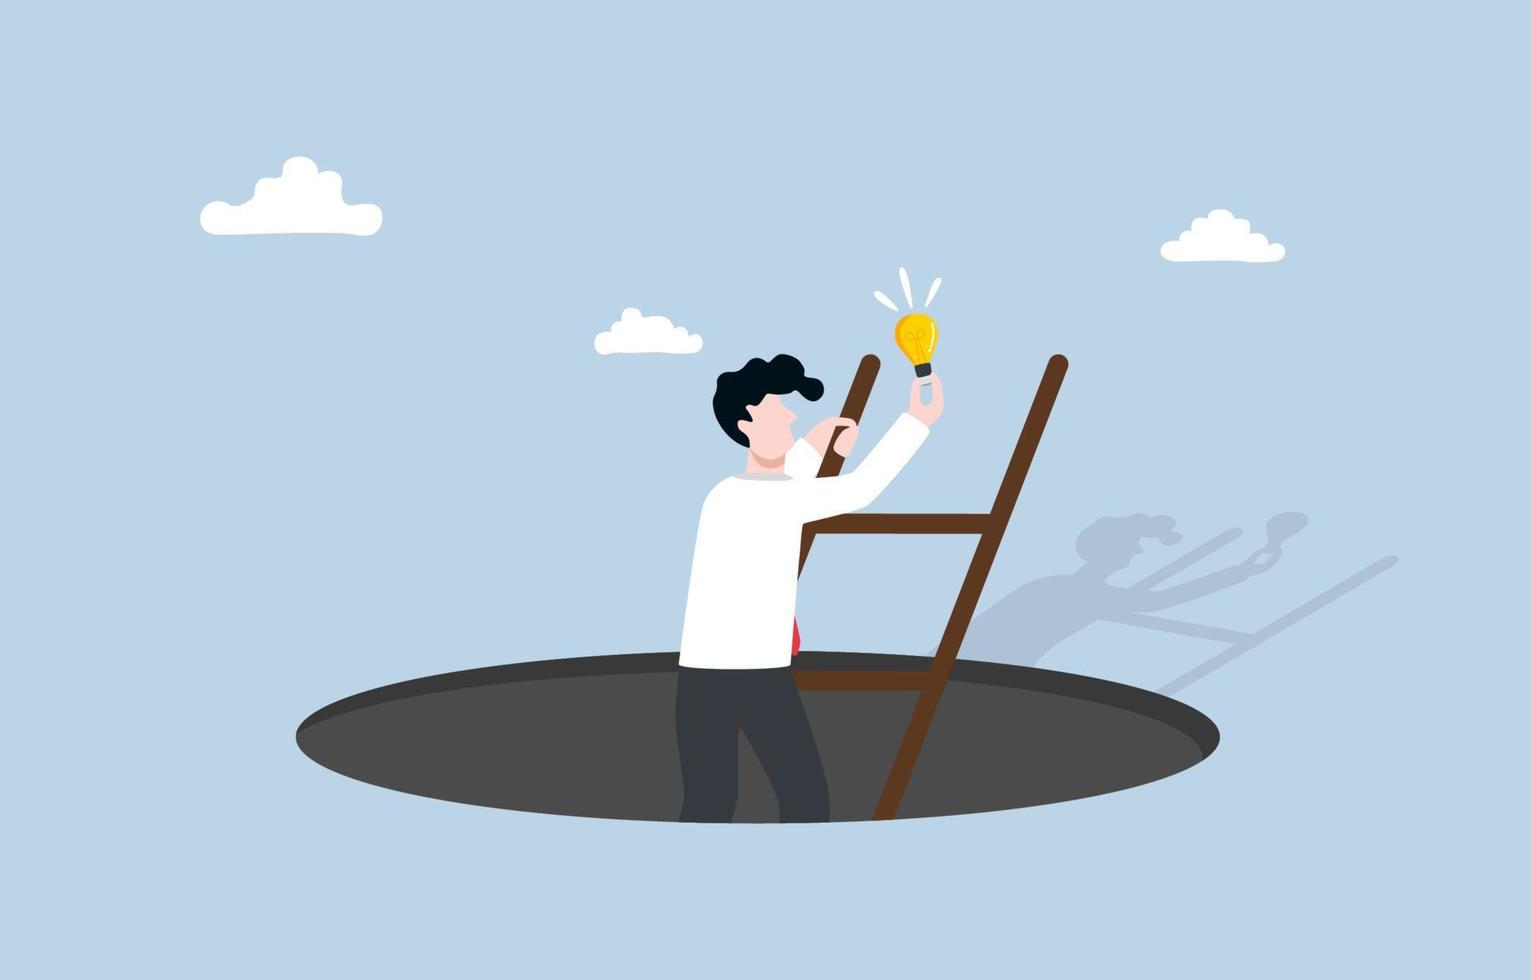 Gaining new knowledge from solving problem, learning from career mistake to improve skills and achieve better result next time concept, Businessman climbing out of hole and holding idea light bulb. vector